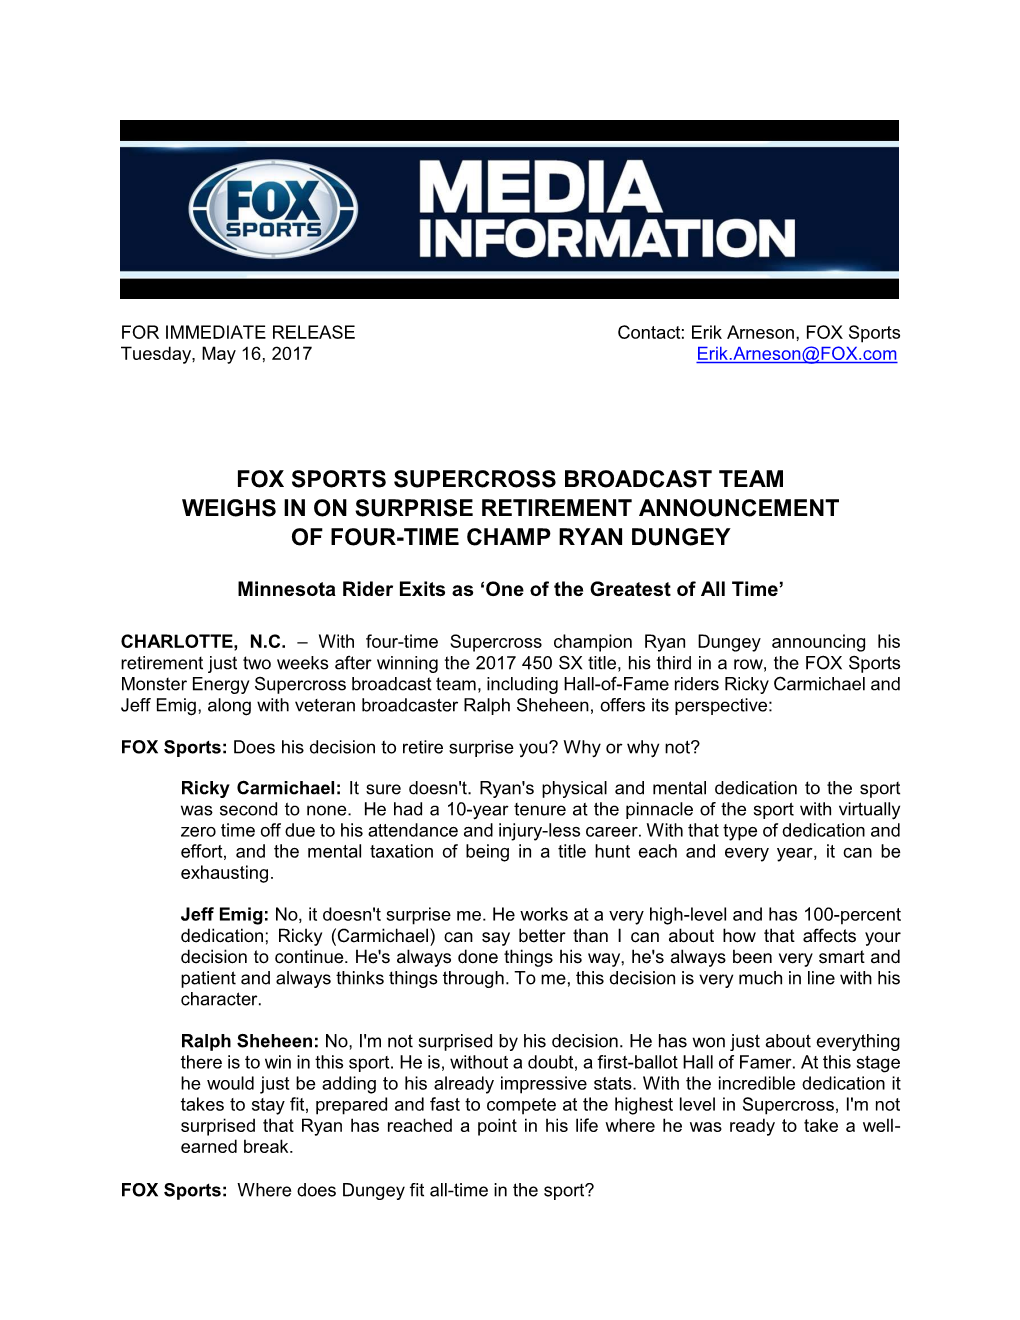 Fox Sports Supercross Broadcast Team Weighs in on Surprise Retirement Announcement of Four-Time Champ Ryan Dungey